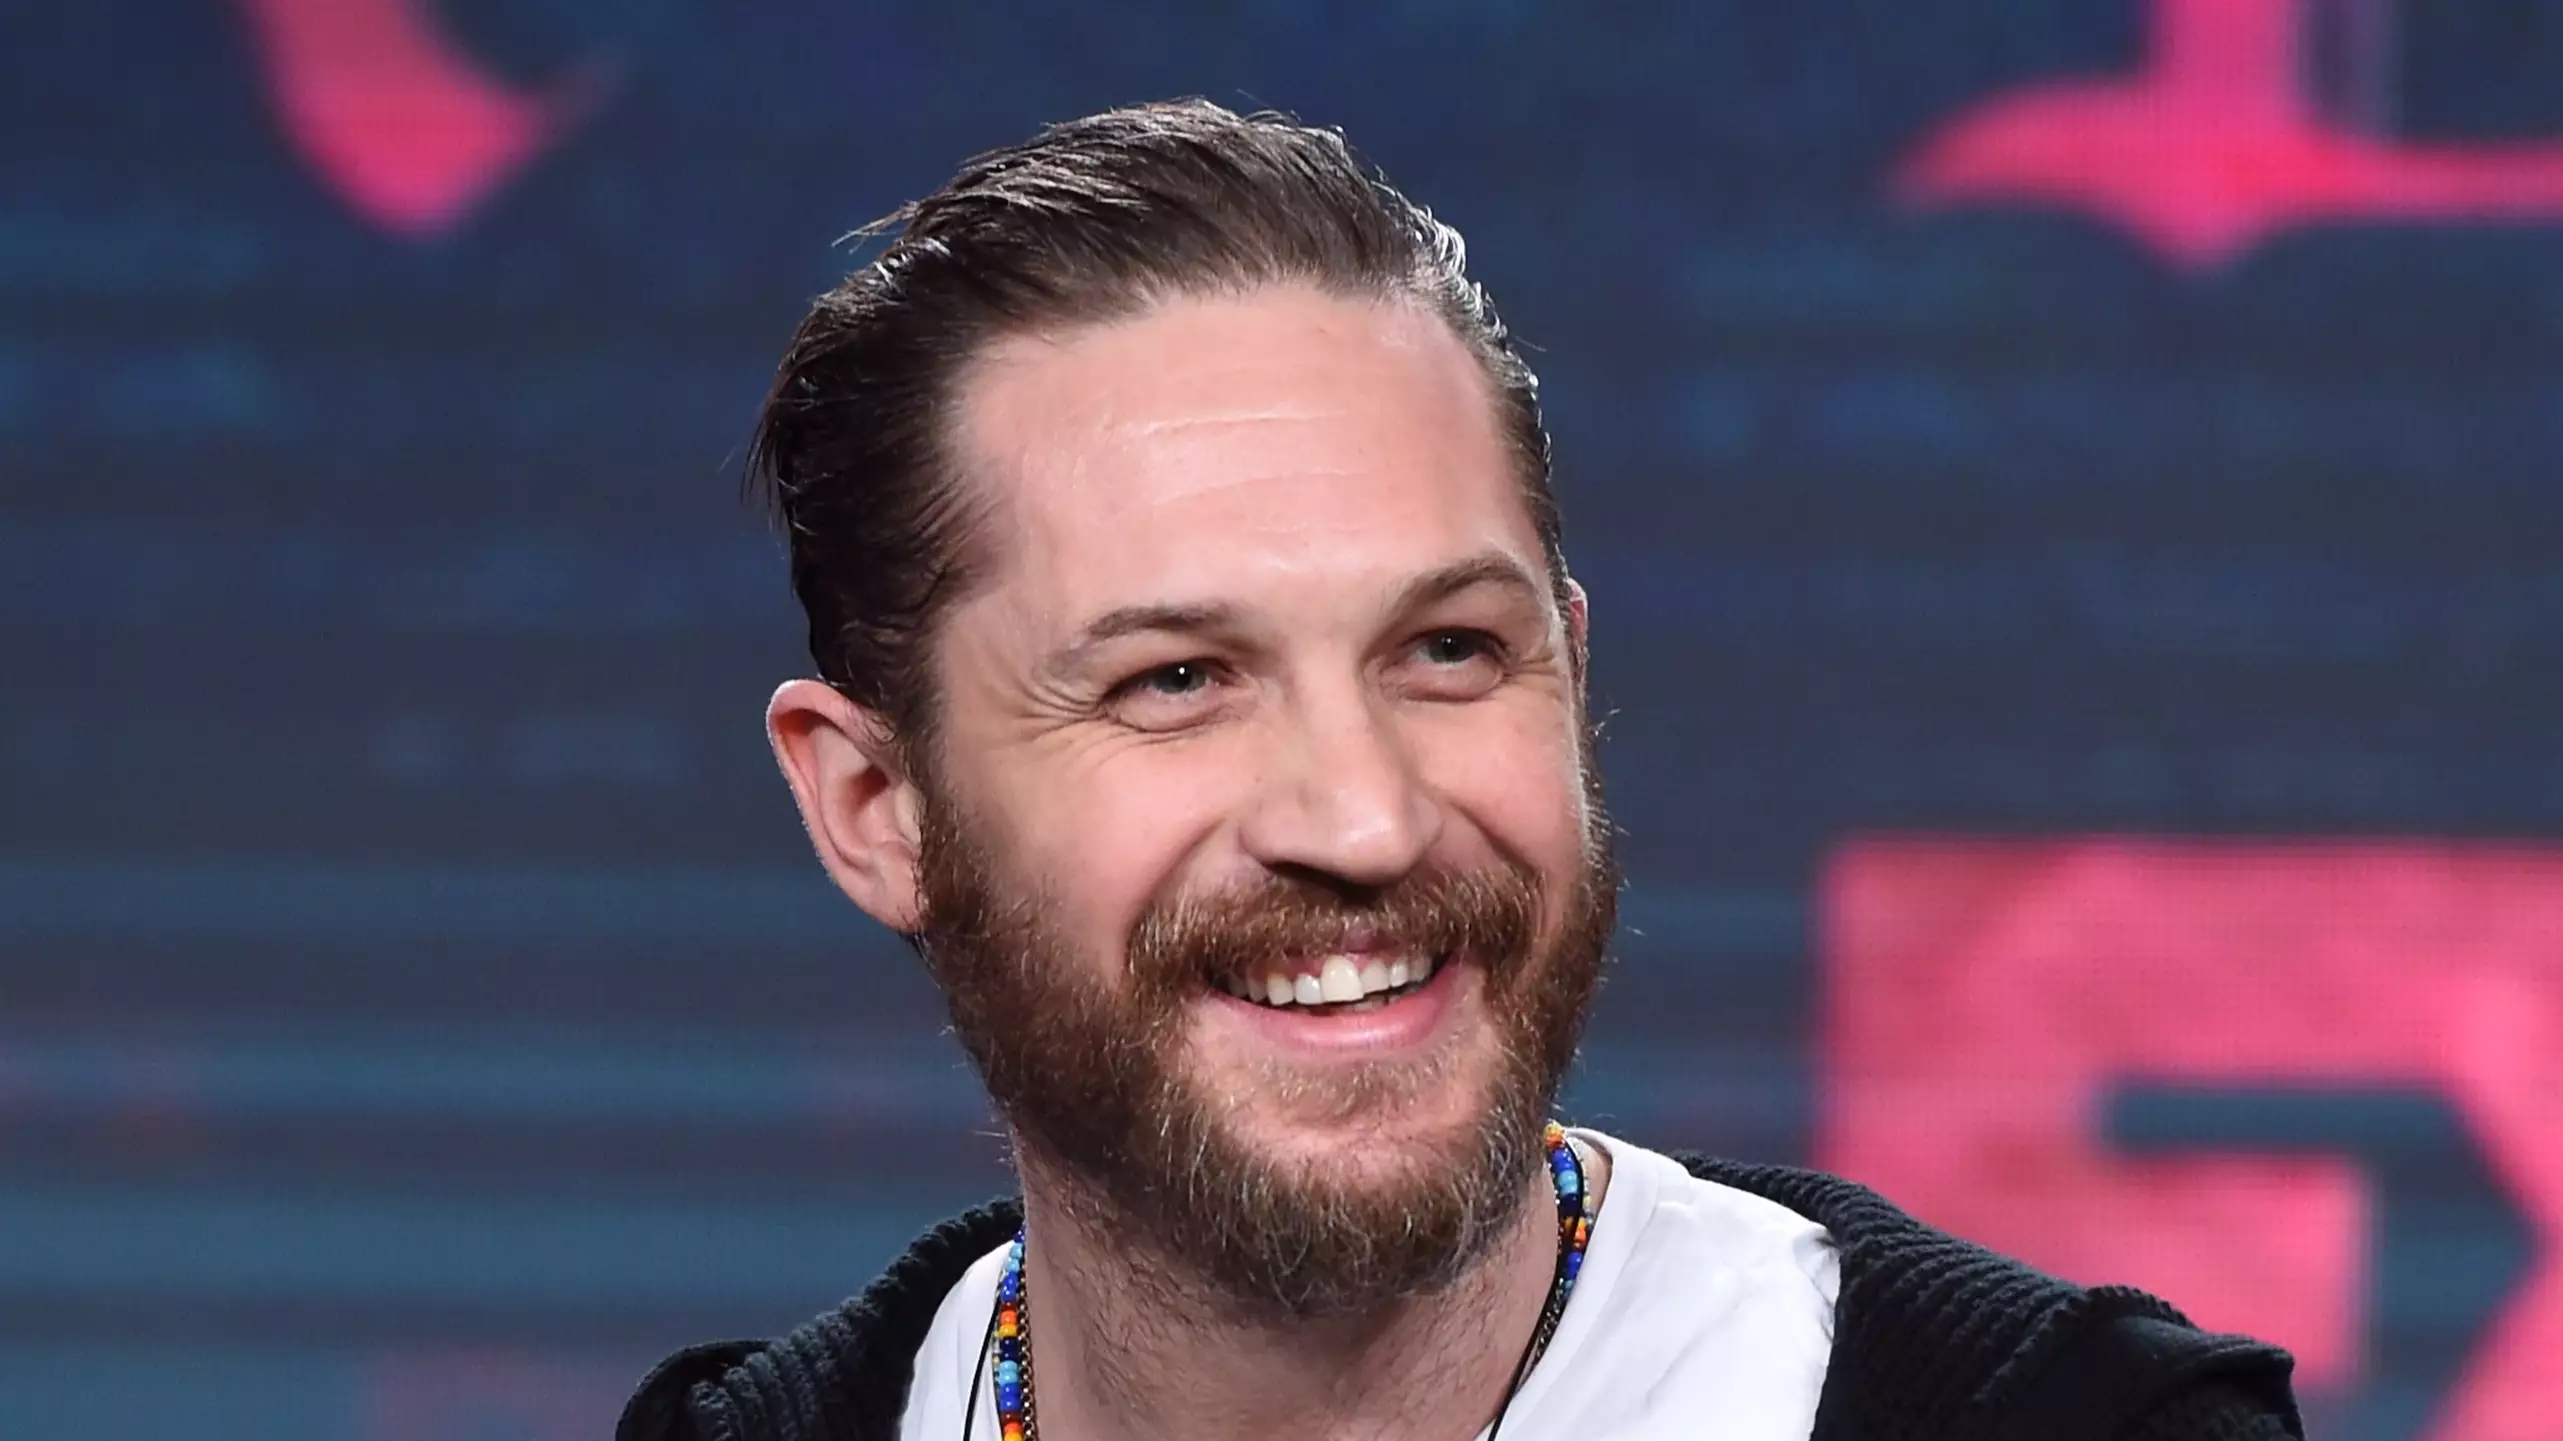 The First Still Of Tom Hardy From The 'Venom' Movie Has Been Released